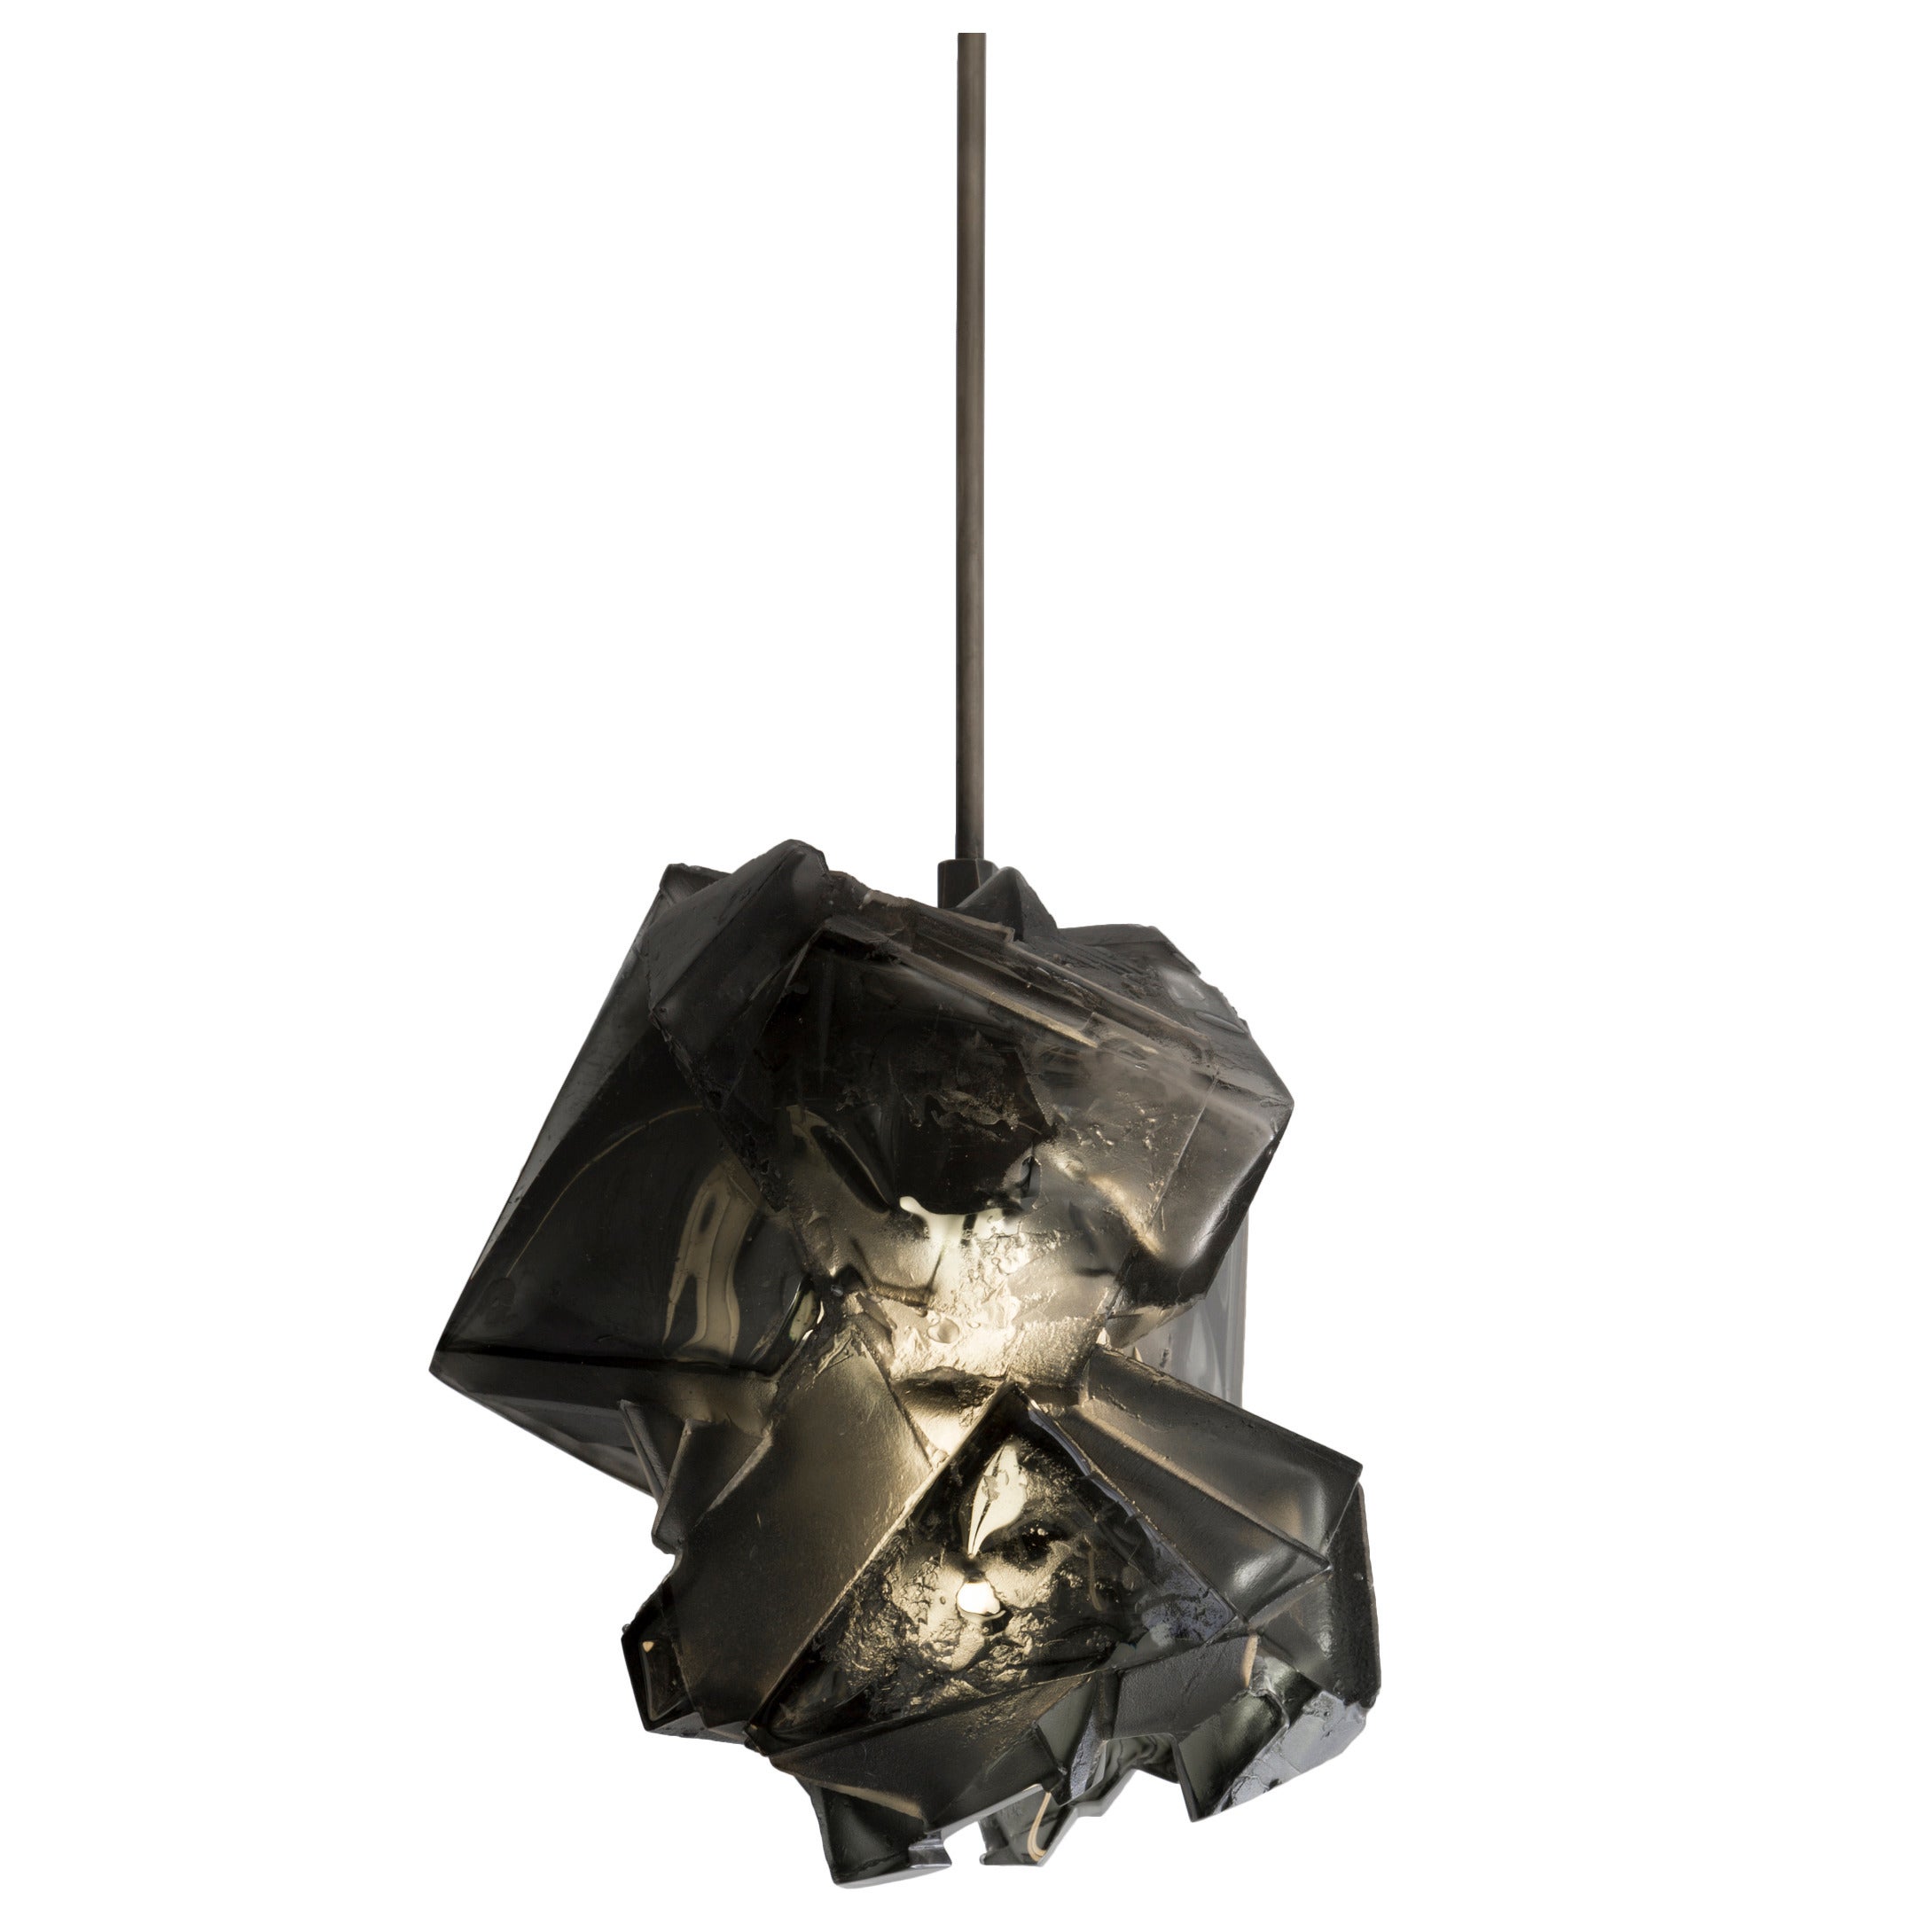 Unique Assemblage Pendant Lamp in Grey Handblown Glass by Thaddeus Wolfe, 2014